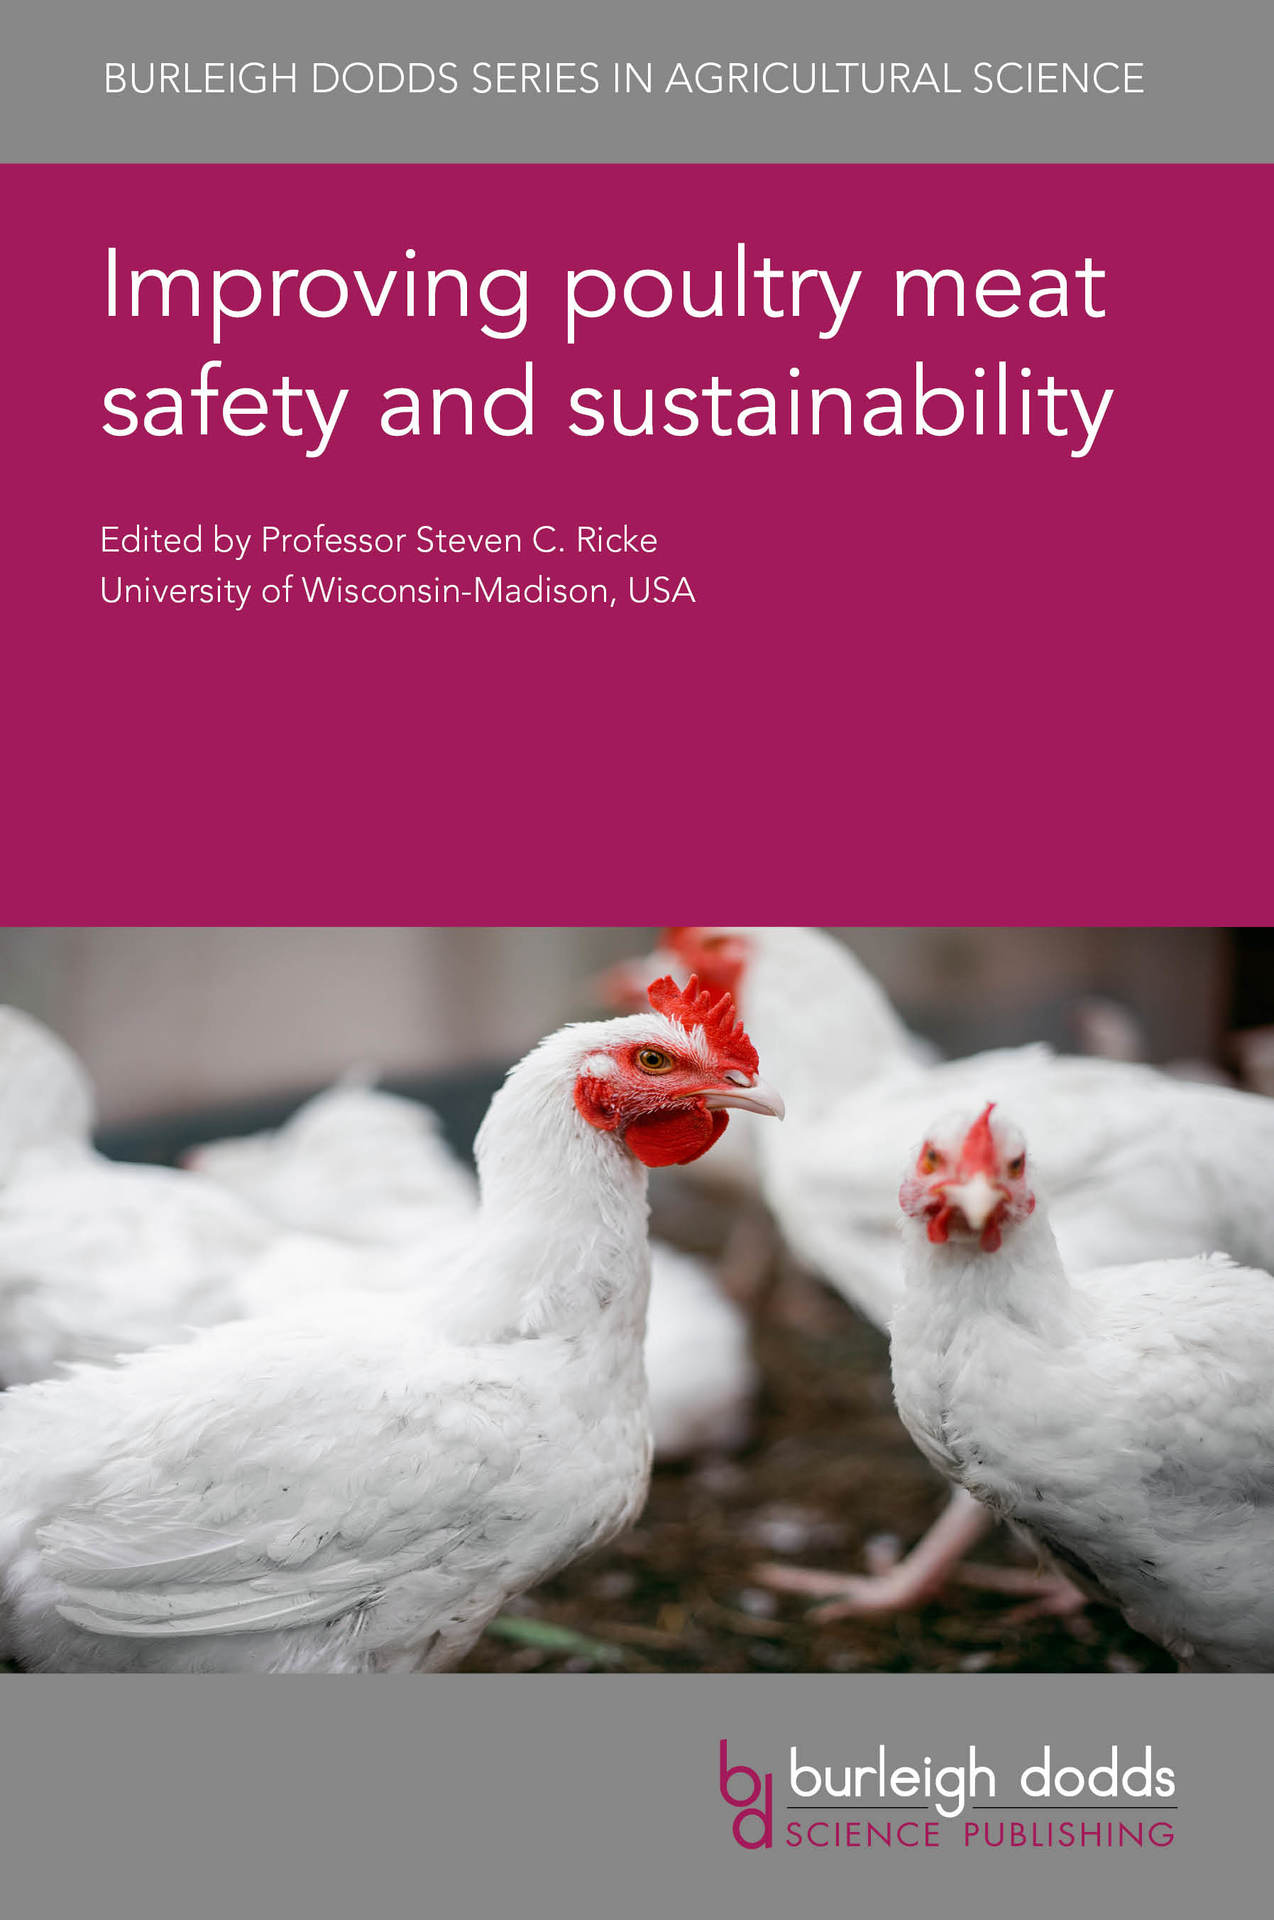 Improving poultry meat safety and sustainability